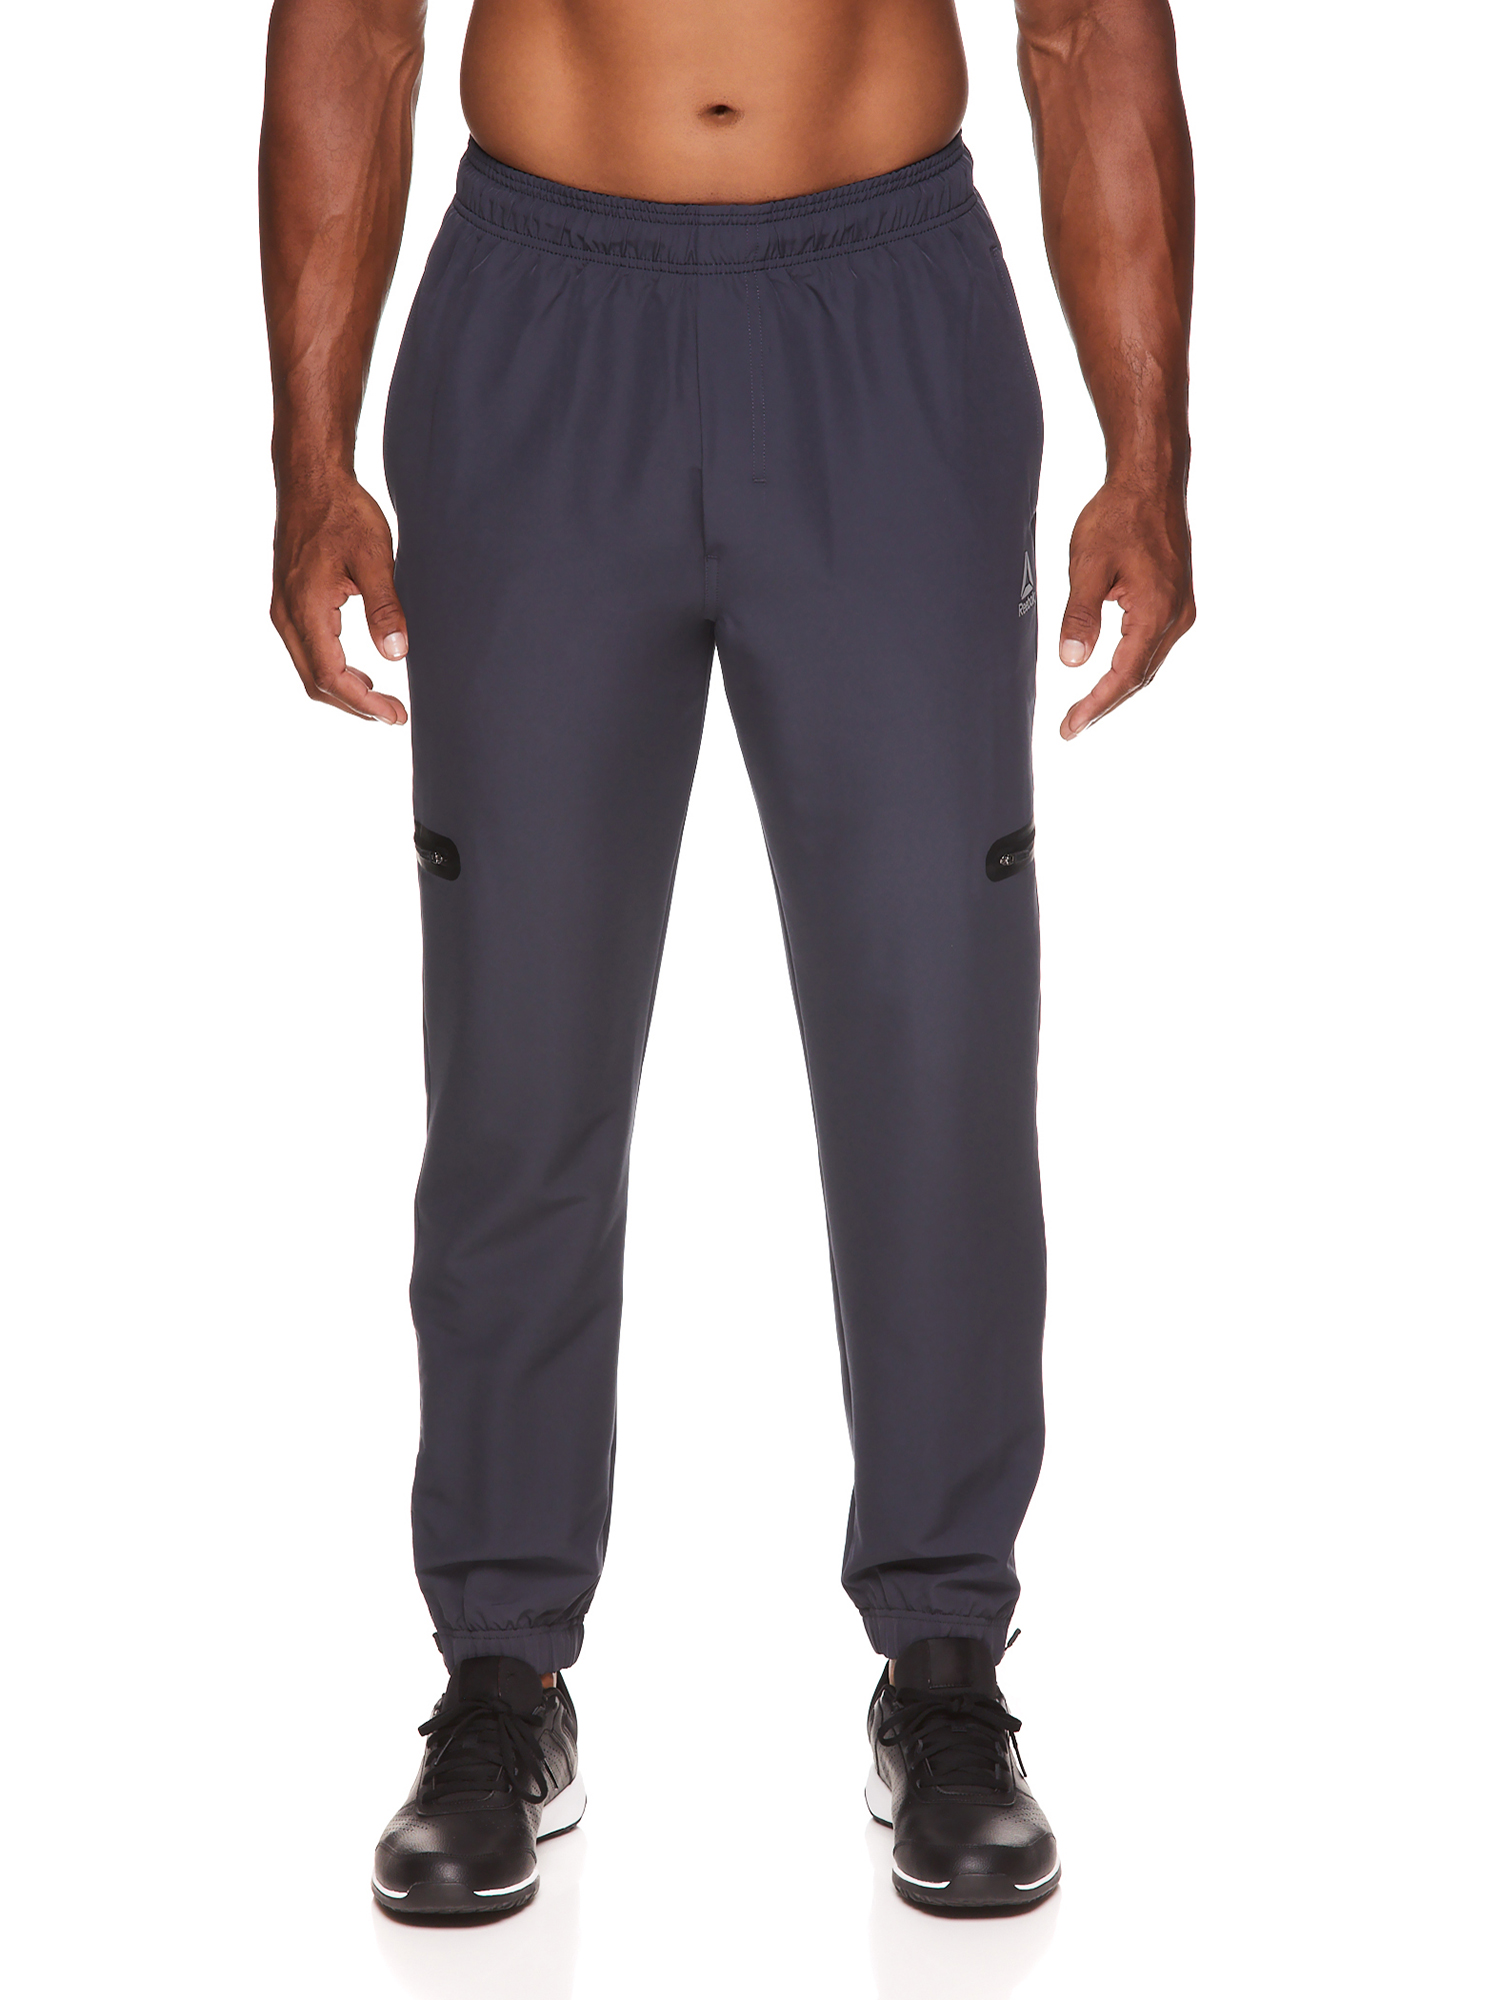 Reebok Men's and Big Men's Momentum Pant, up to Size 3XL - image 1 of 4